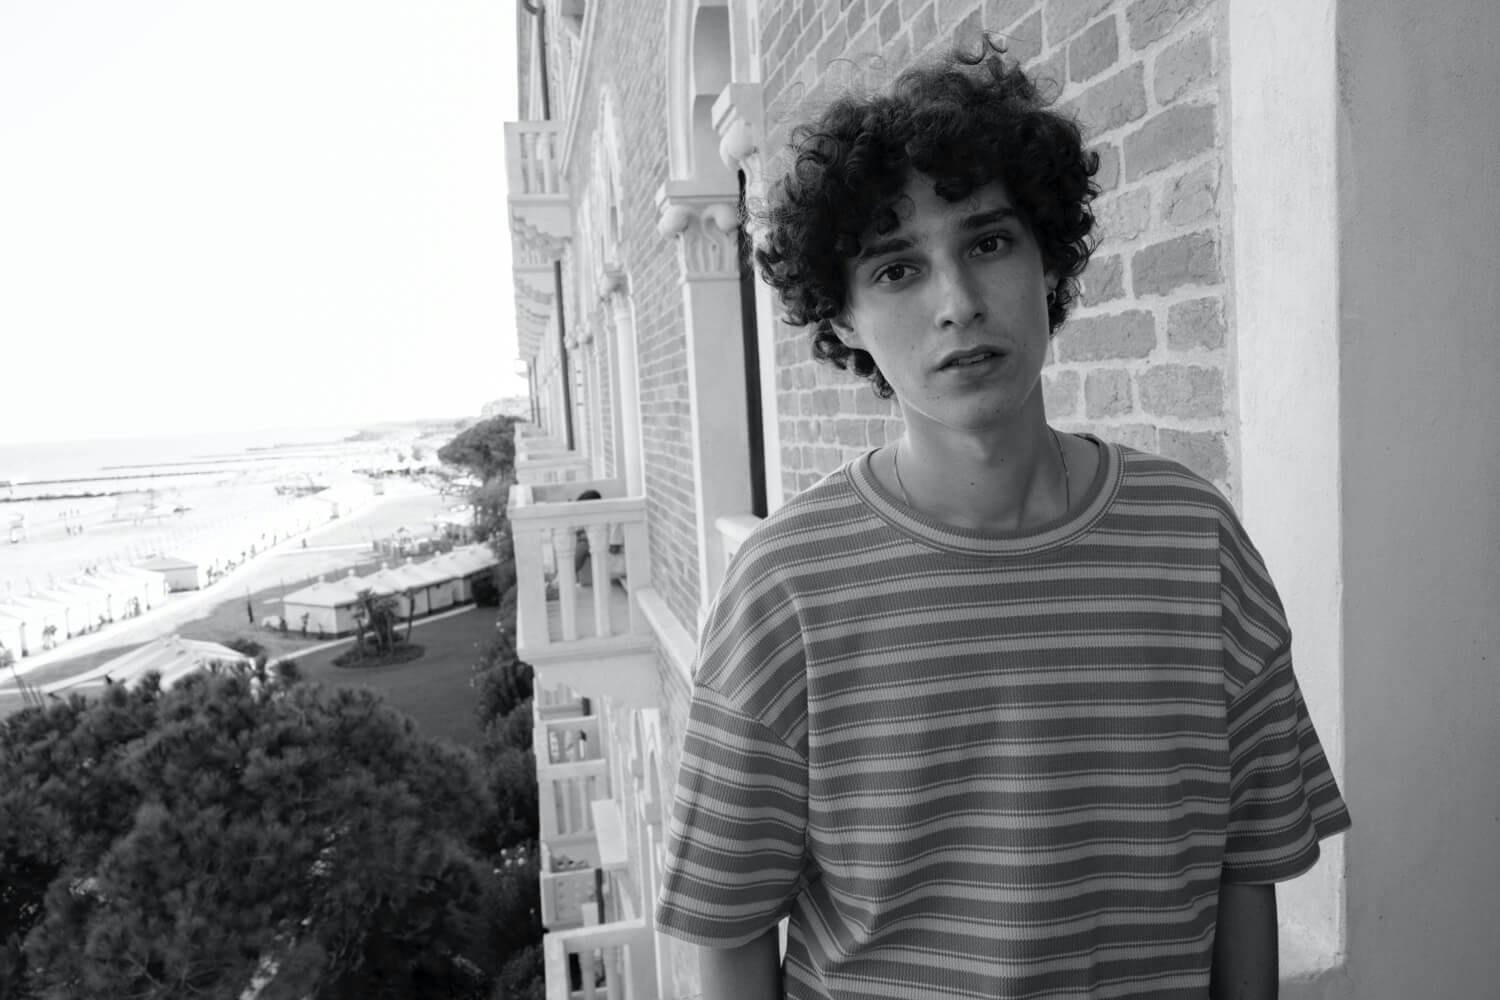 Filippo Scotti at the Venice Film Festival, 2021 wears a striped tshirt and stands on a balcony with a beach in the background.